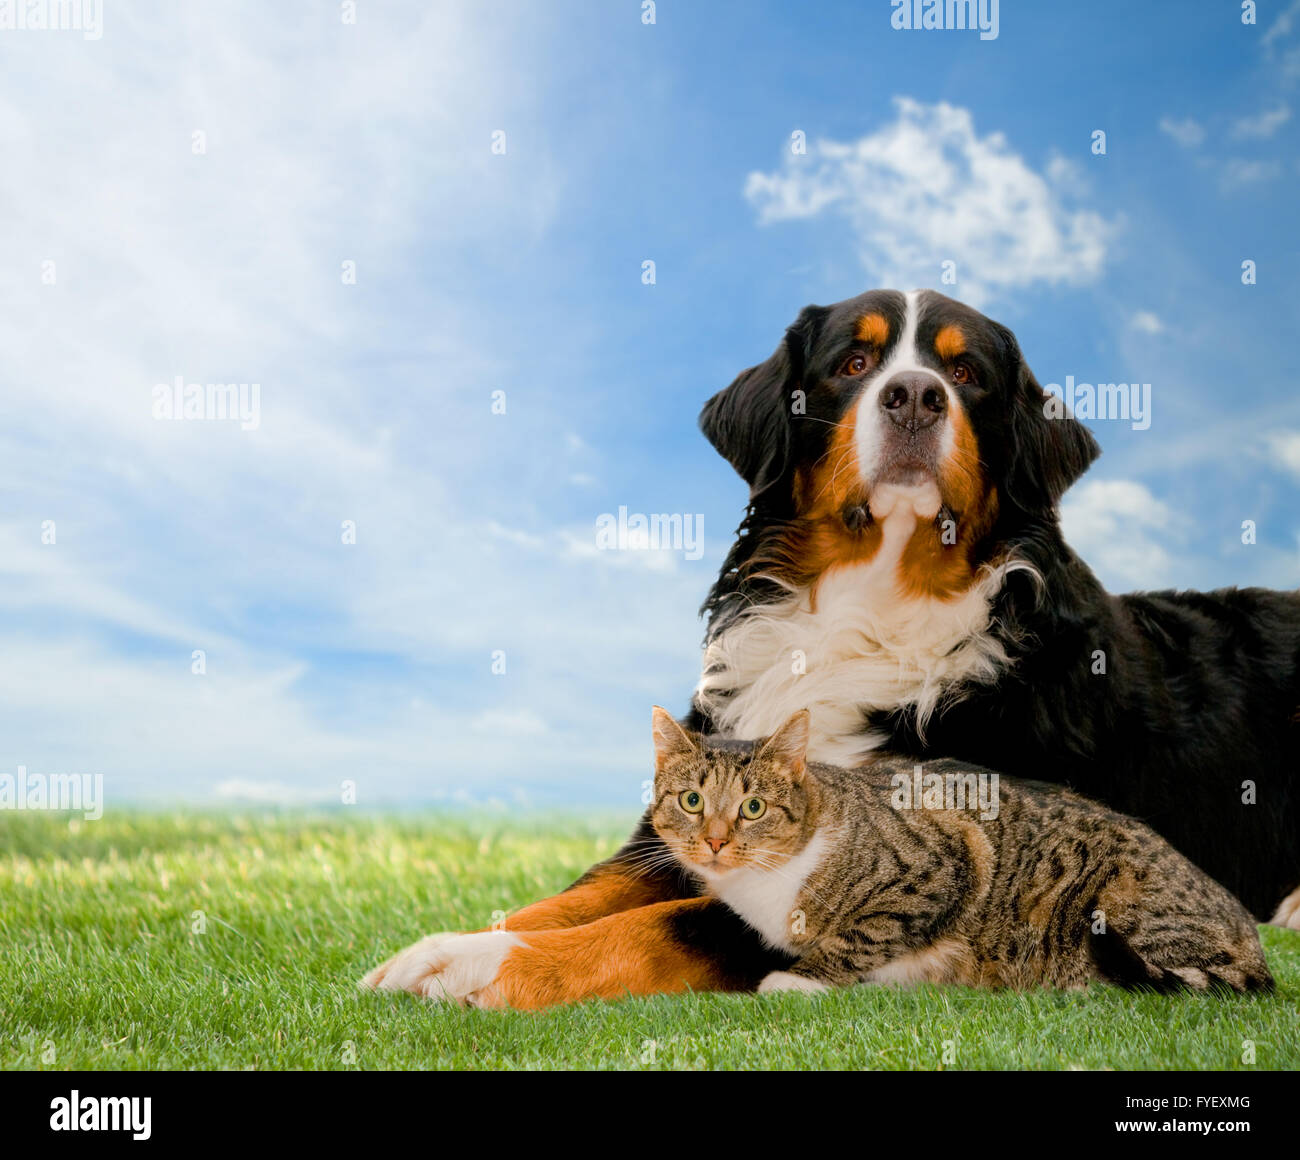 Dog and cat together on grass Stock Photo